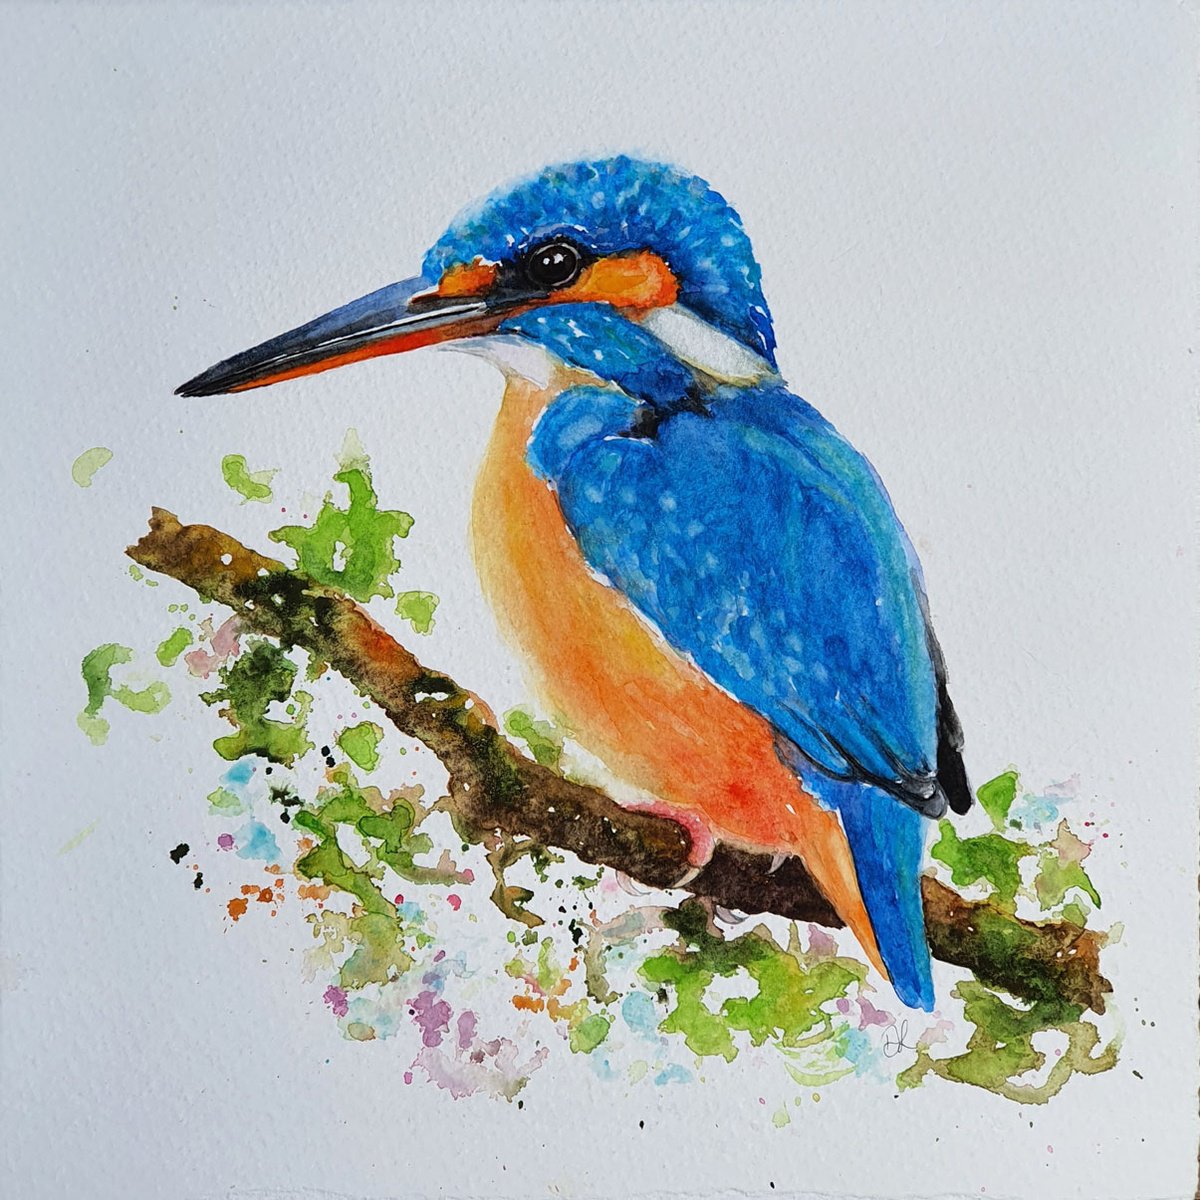 Kingfisher In Watercolour by Denise Laurent